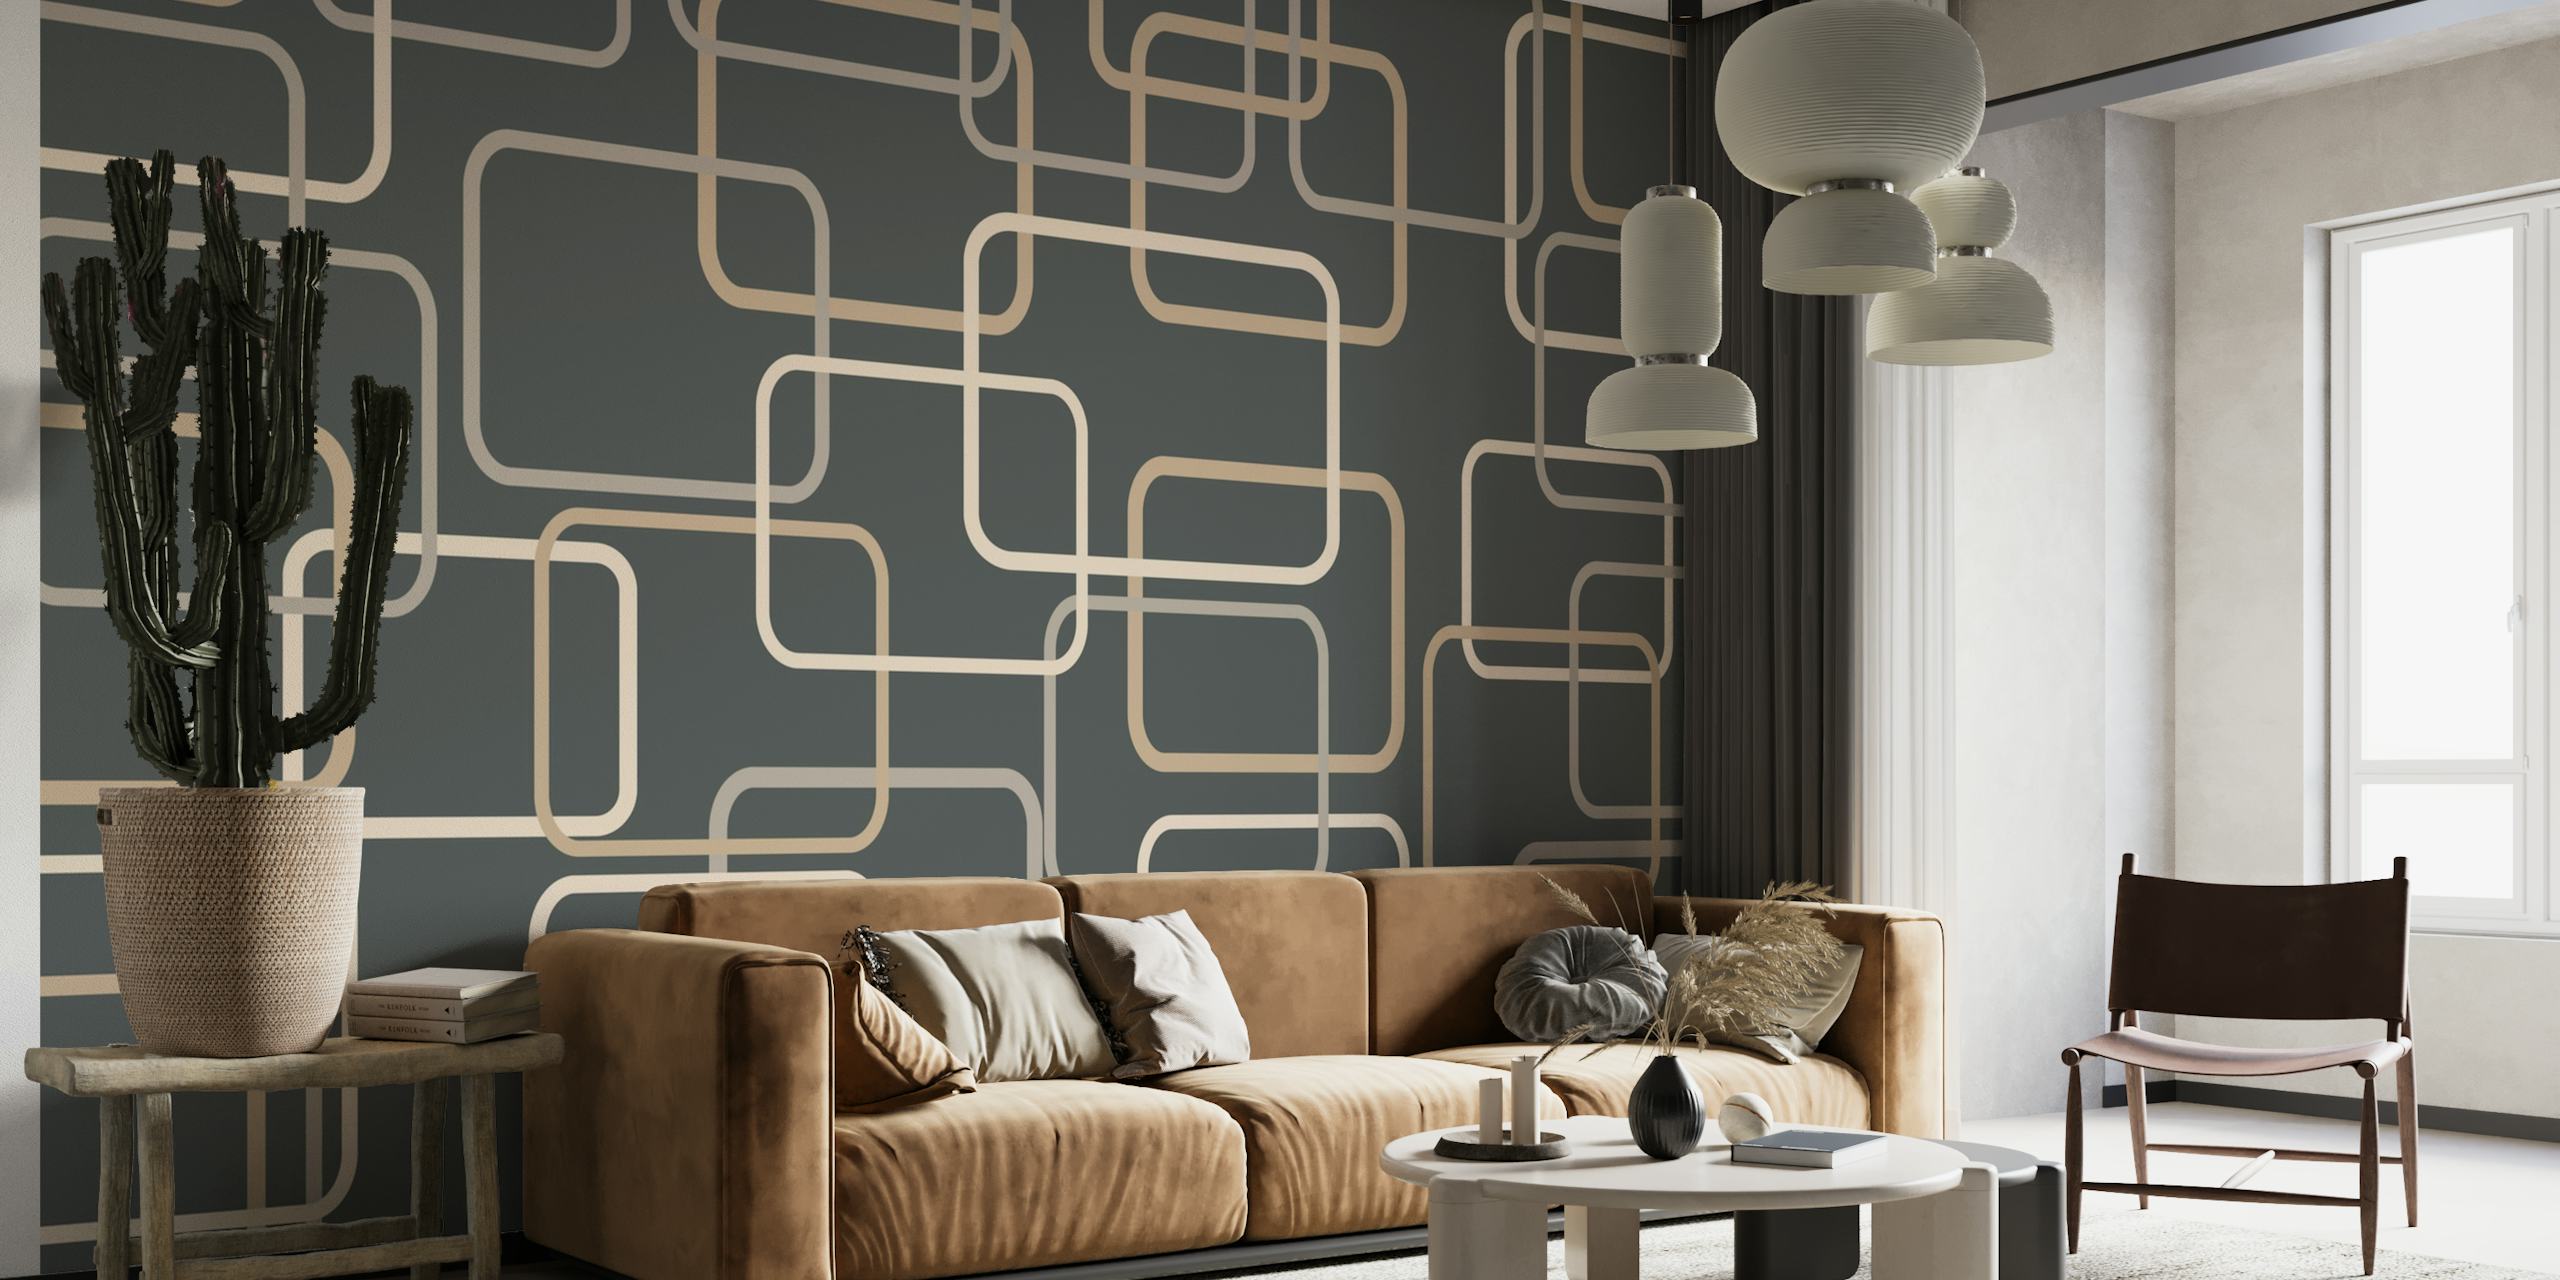 Midcentury geometric patterned wall mural in shades of gray, cream, and beige